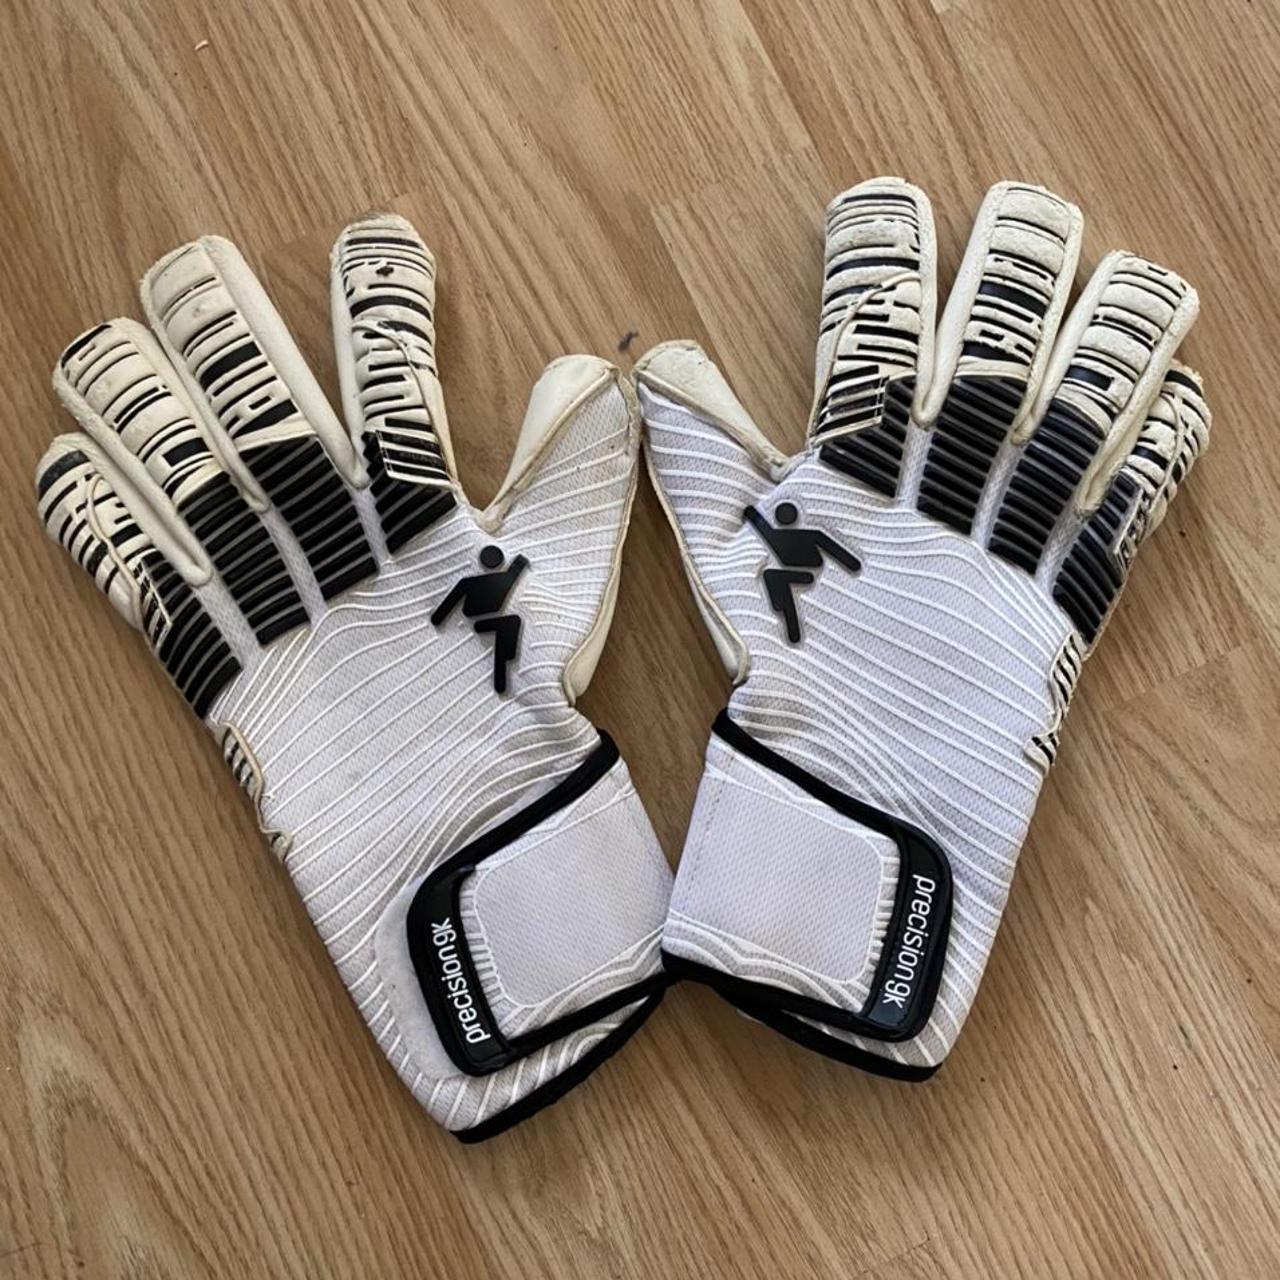 Precision Goalkeeper Gloves • 2 PAIRS • SIZE 9.5... - Depop